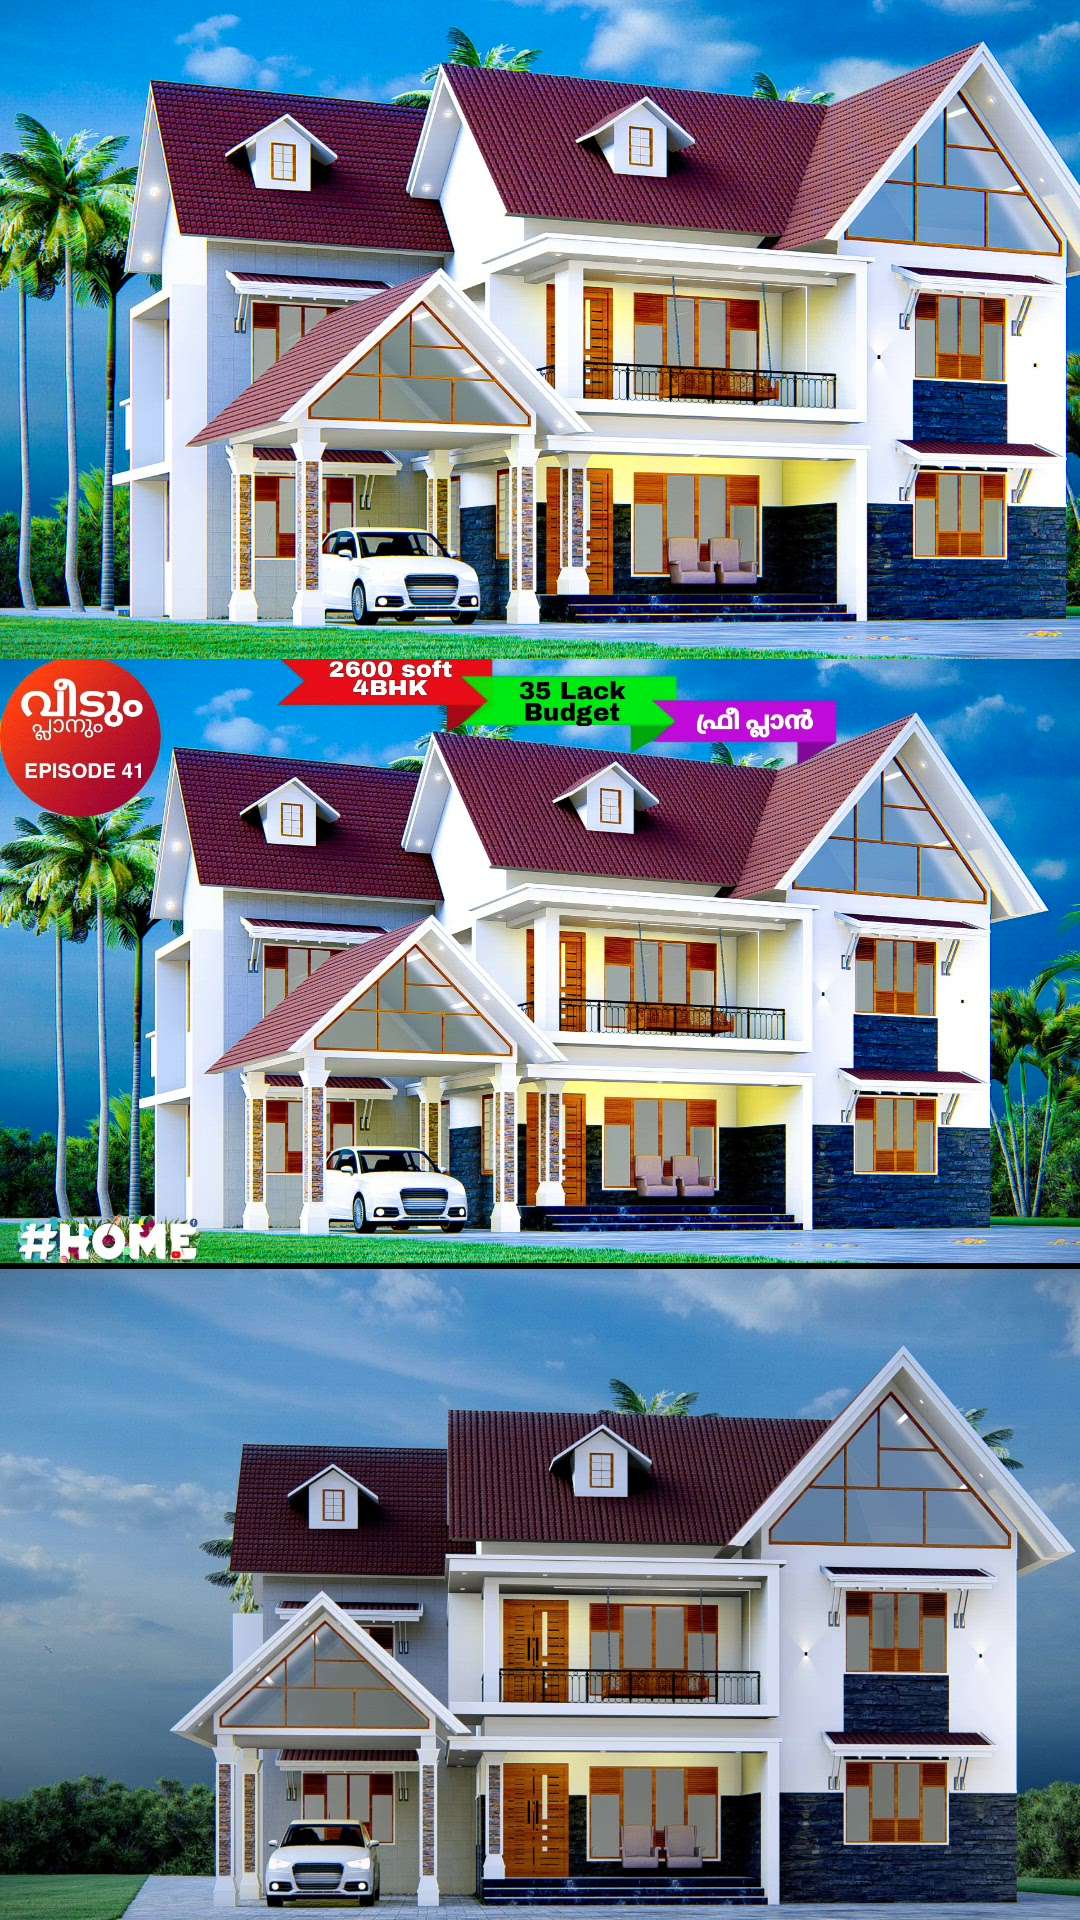 Kerala Budget Home Plan 🏡 3BHK | SINGLE STORY | Area : GF - 1187 sq.ft Design:
 Ground Floor
 ● Sitout
 ● Living
 ● Dining
 ● 1Bedroom attached
 ● 2nd Bedroom attached with Dressing 
● 3rd Bedroom attached 
● Kitchen 
● Work area ] . . . #sthaayi_design_lab #sthaayi #floorplan | #architecture | #architecturaldesign | #housedesign | #buildingdesign | #designhouse | #designerhouse | #interiordesign | #construction | #newconstruction | #civilengineering | #realestate #kerala #budgethome #keralahomestyle